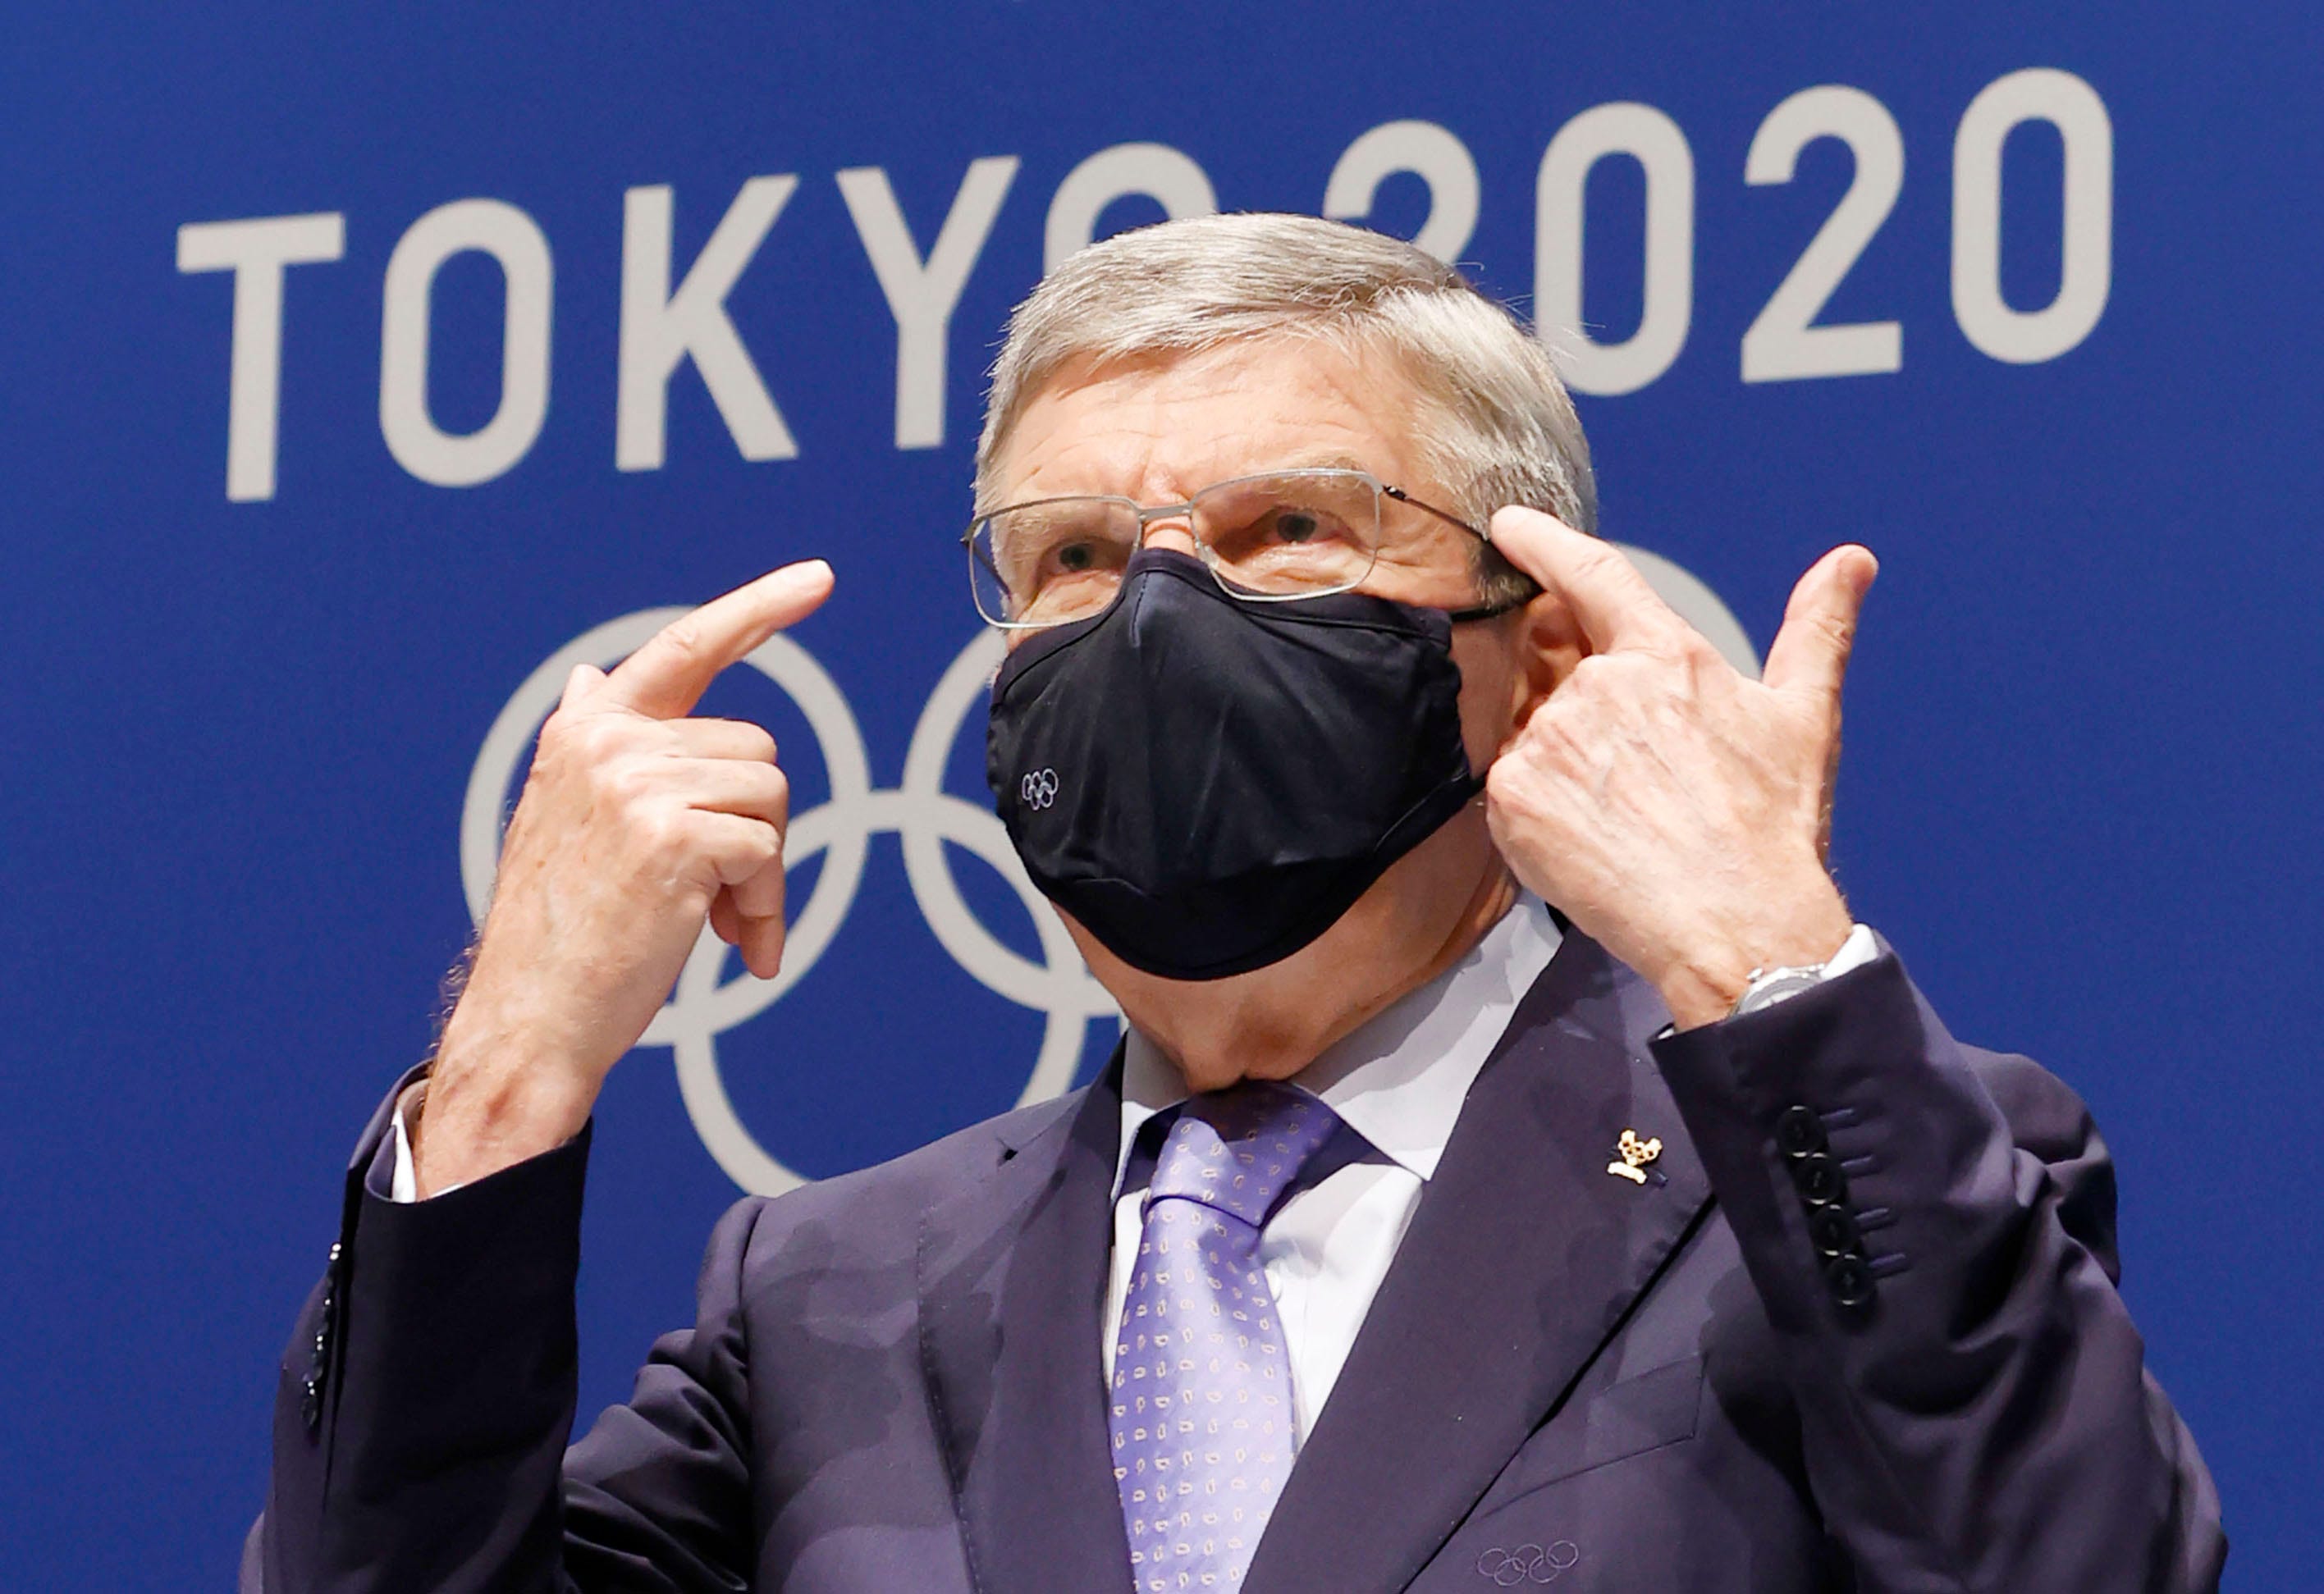 IOC President Thomas Bach gestures during a press conference at the Main Press Center, ahead of the Tokyo 2020 Olympic and Paralympic Games in Tokyo, Saturday, July 17, 2021. The first resident of the Olympic Village has tested positive for COVID-19, Tokyo Olympic organizers said on Saturday.